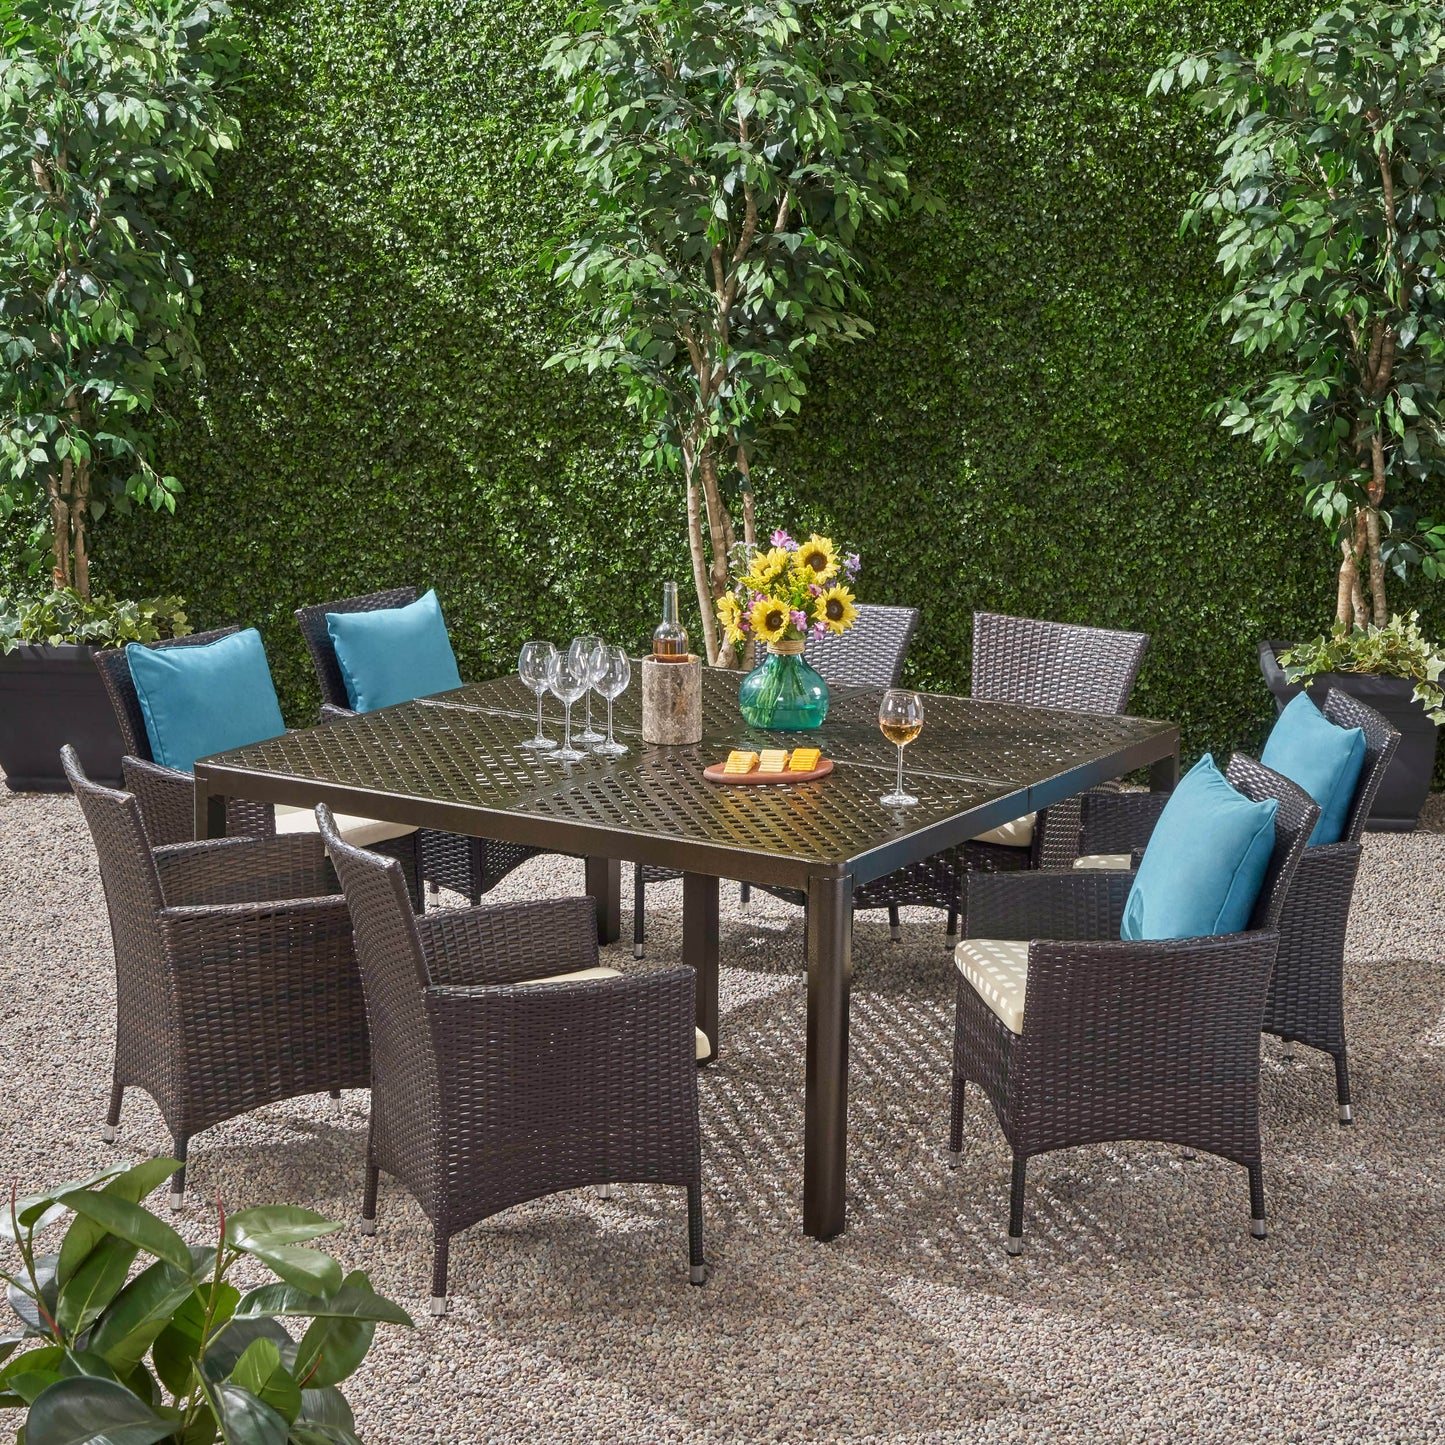 Nelly Outdoor Aluminum and Wicker 8 Seater Dining Set